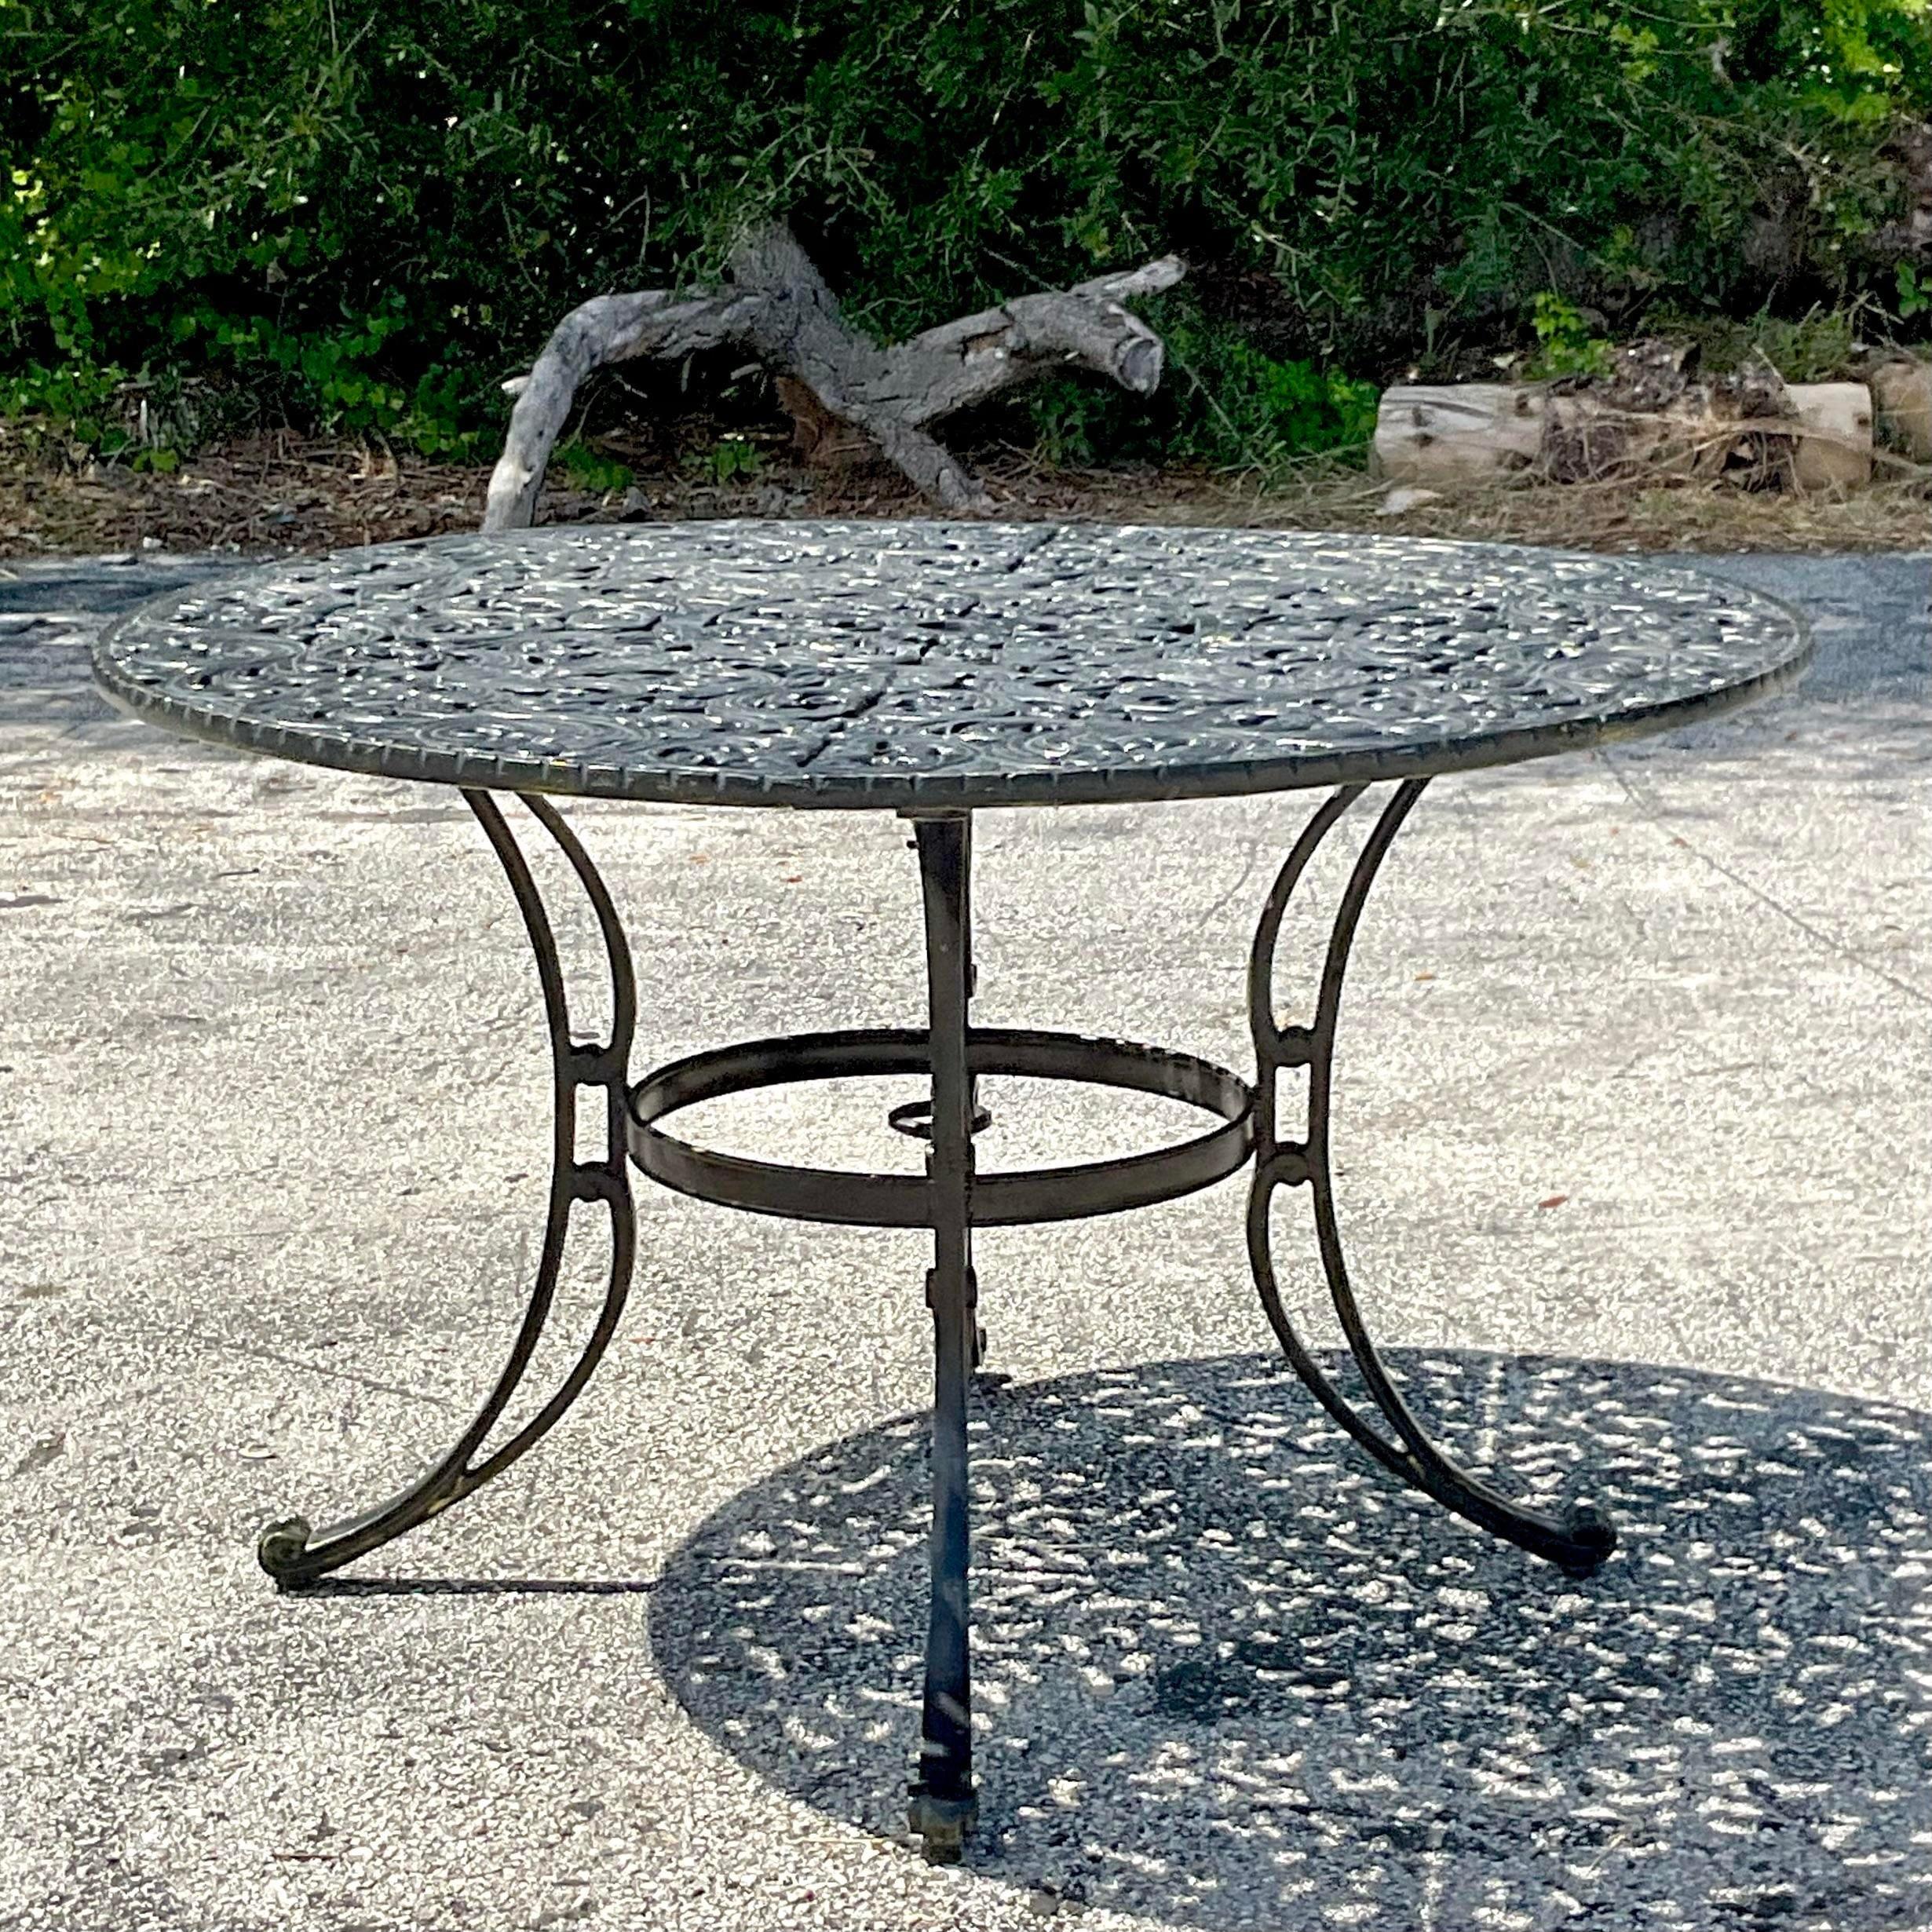 American Vintage Coastal Cast Aluminum Outdoor Dining Table For Sale